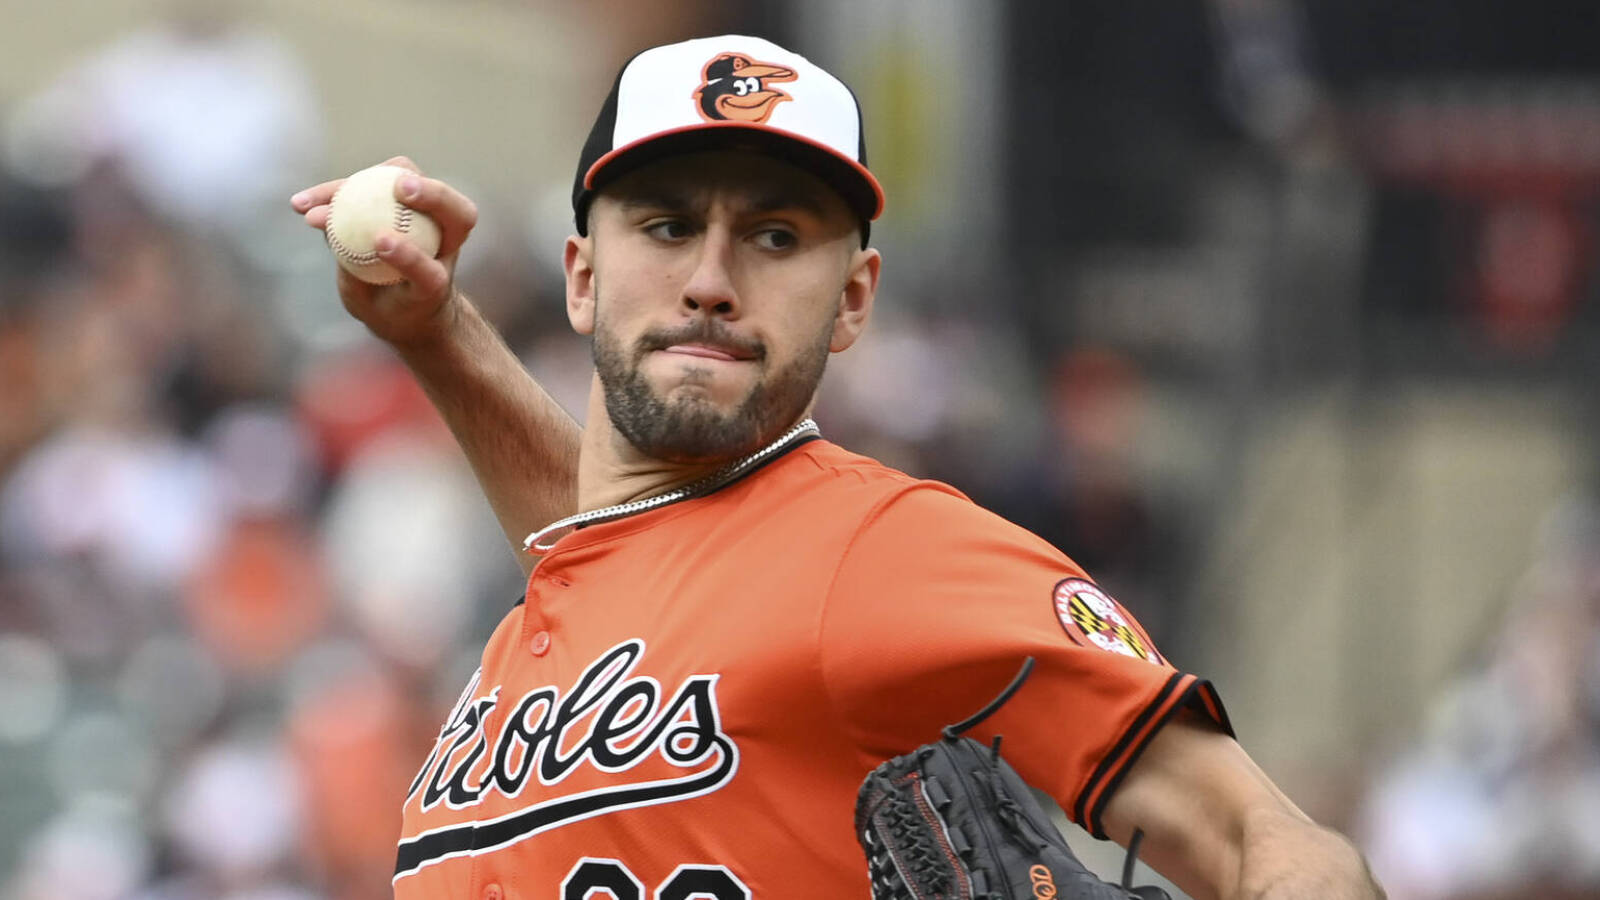 Orioles starting pitcher returning from IL stint